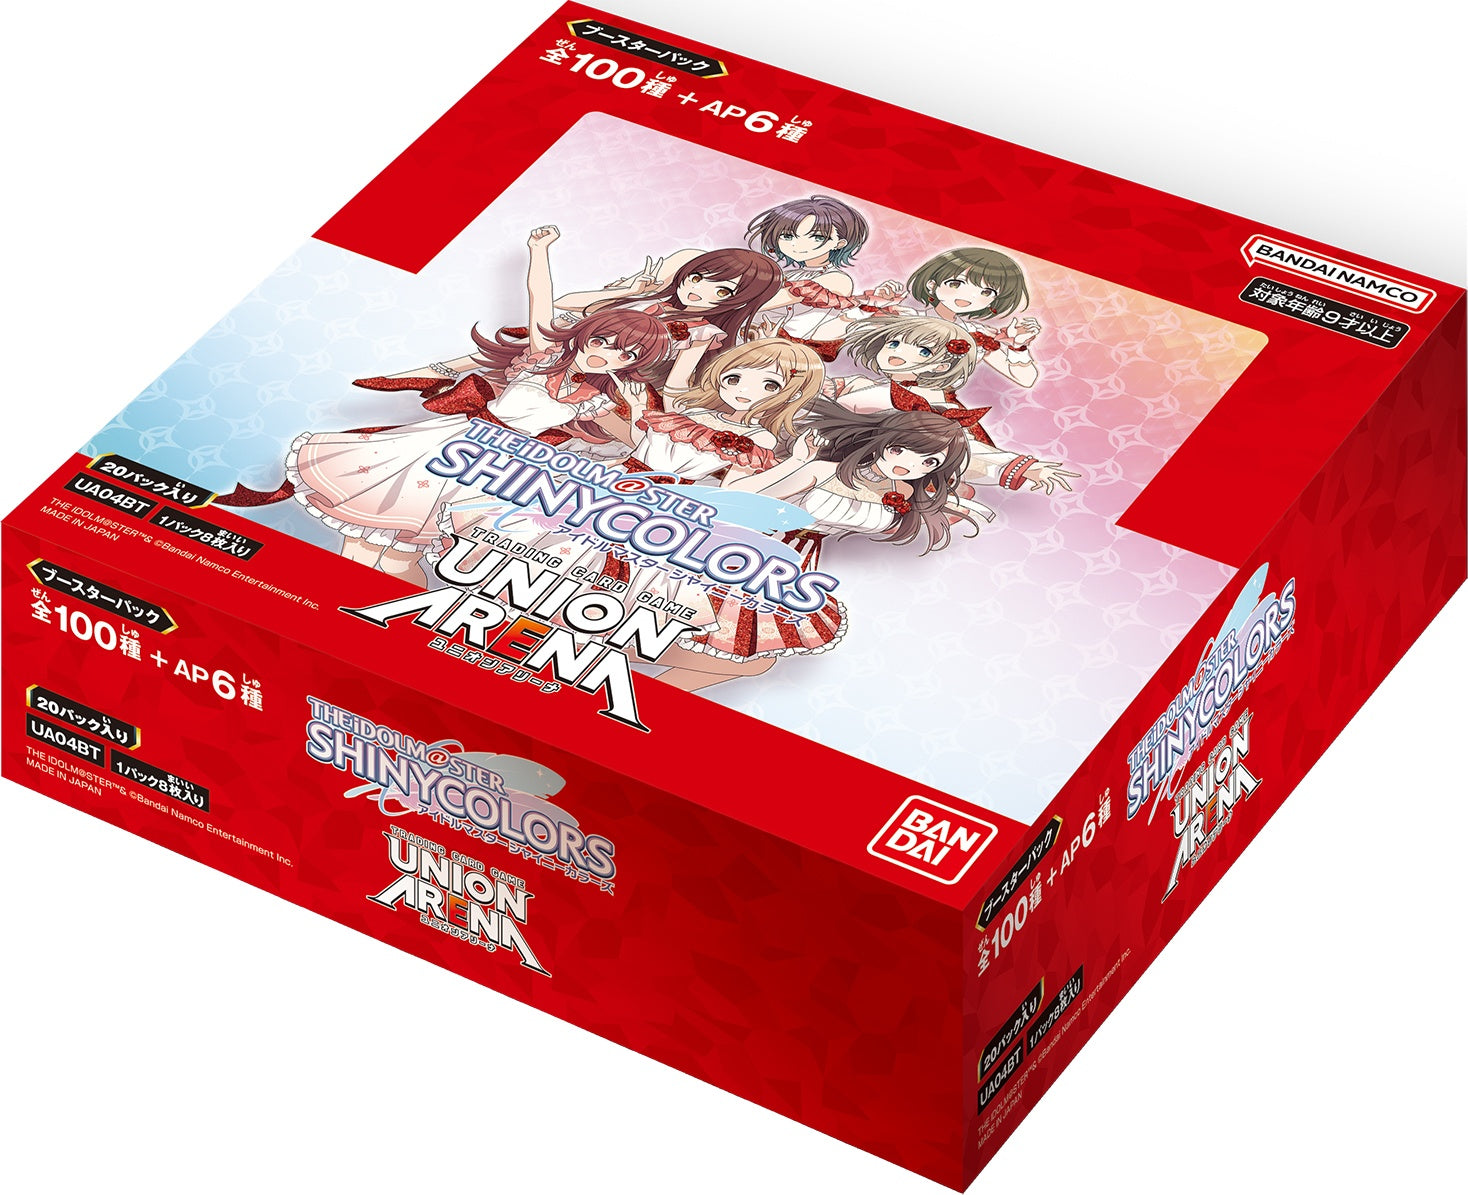 Union Arena Idolmasters Shiny Colors Booster Case [12 Box] - n4ytcg